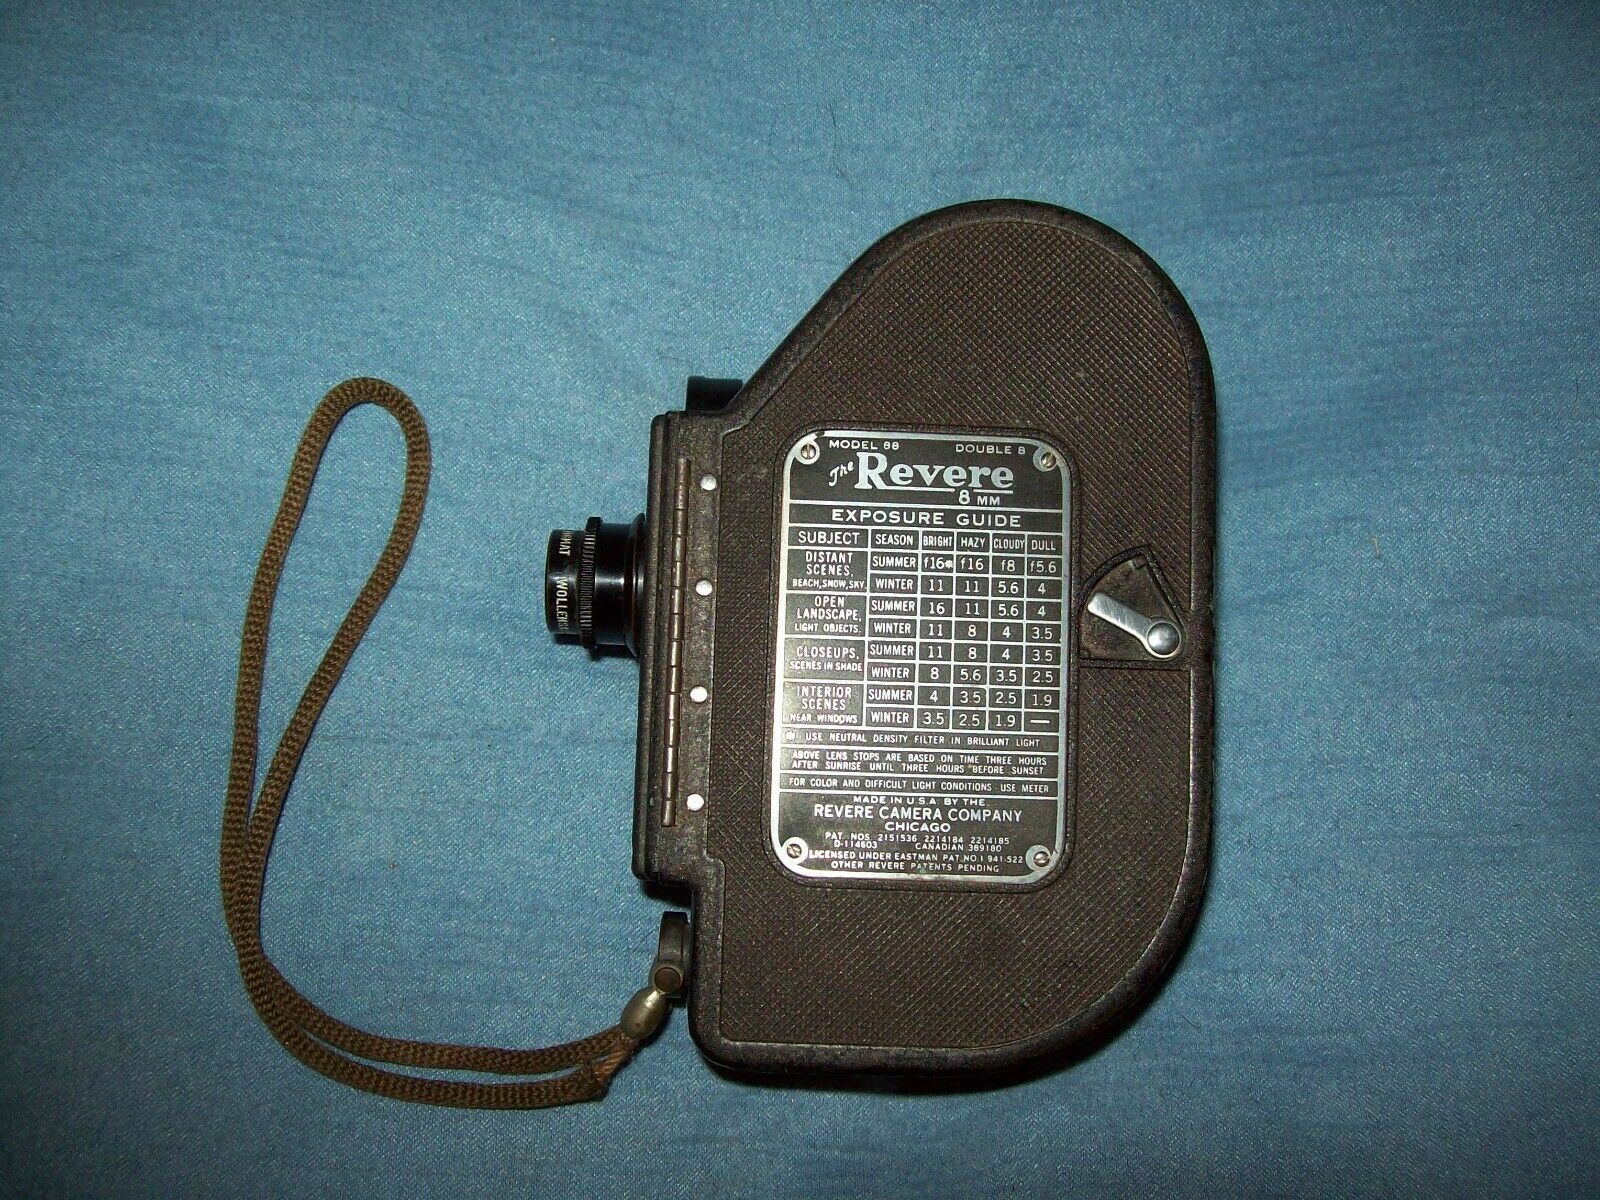 Vintage Revere 8mm Movie Camera Model 88 Double 8 Made In USA - GENTLY USED! - $49.50